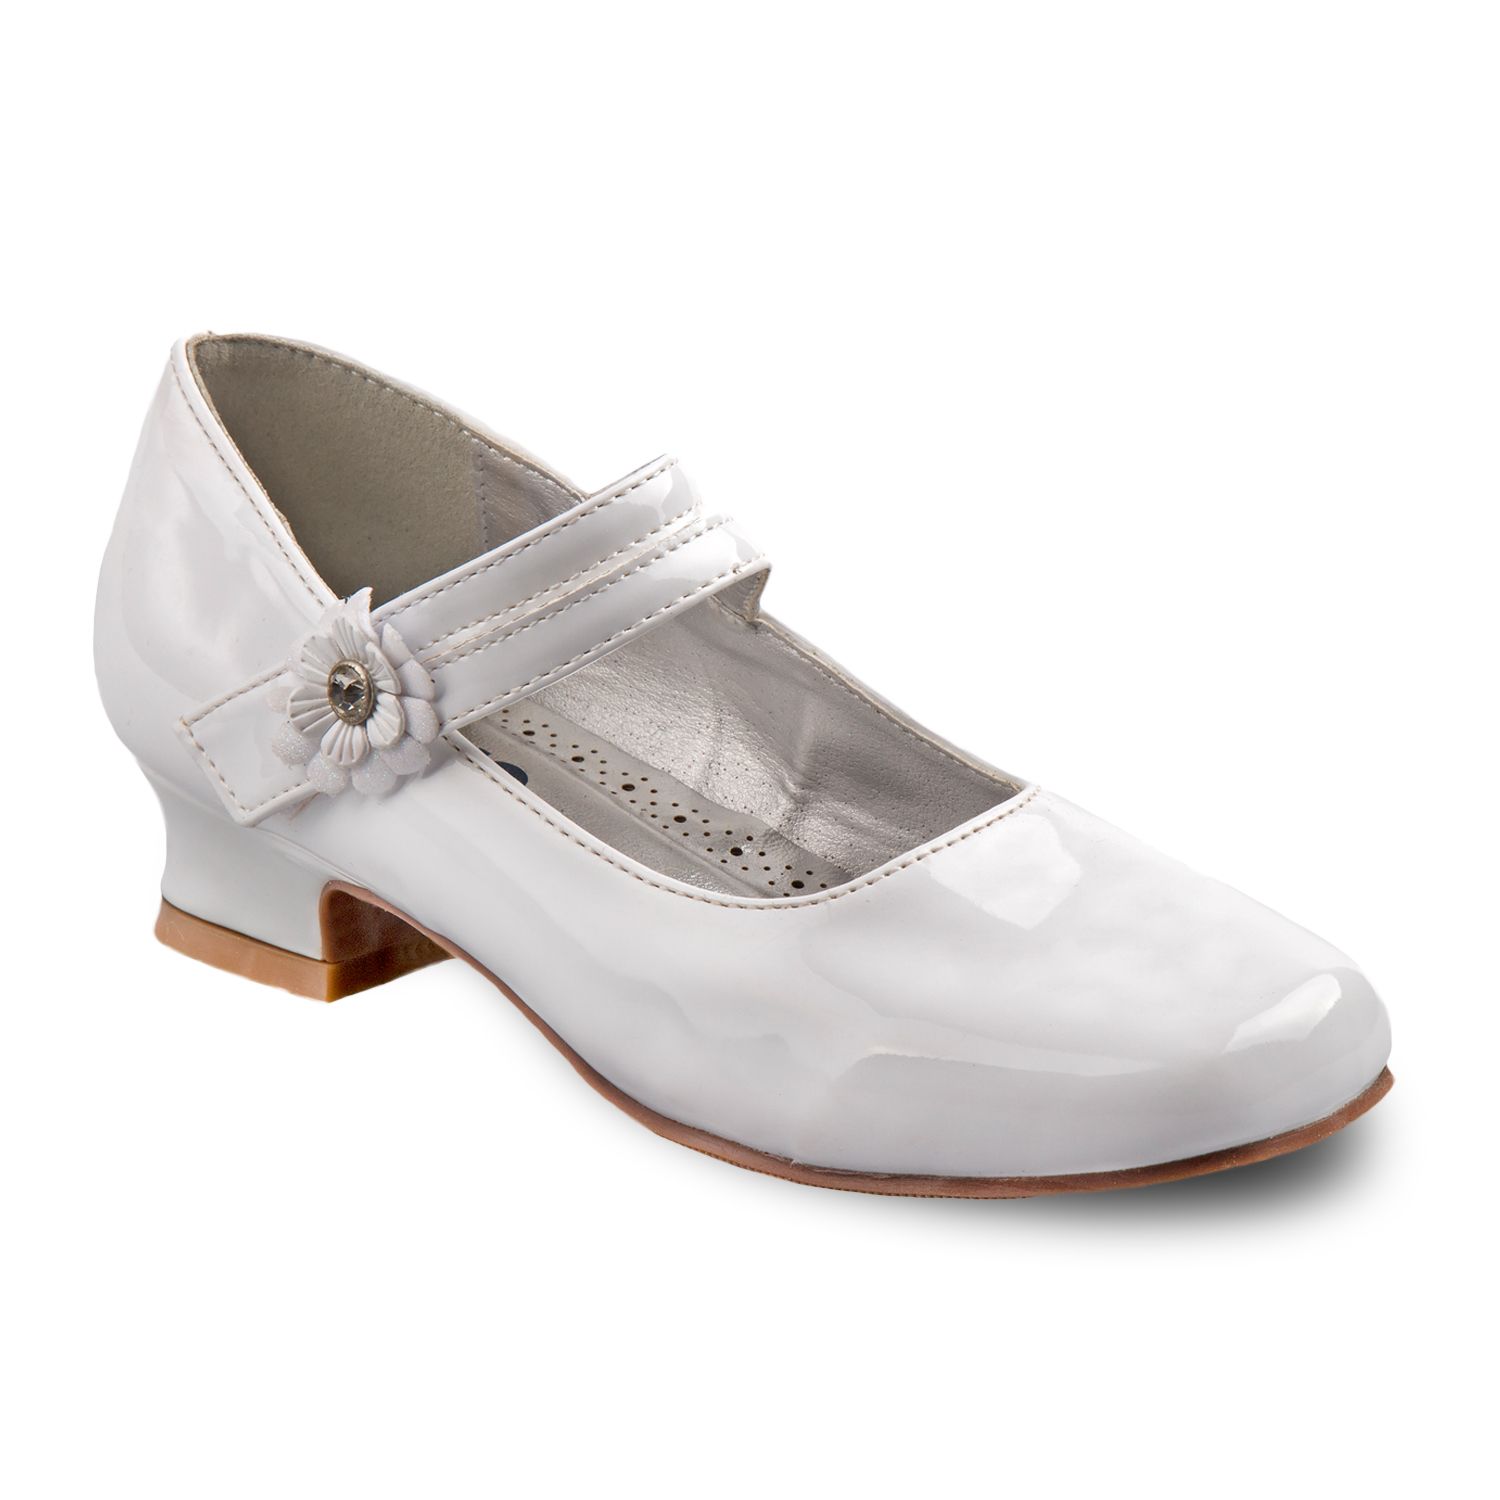 baby girl white dress shoes size 4